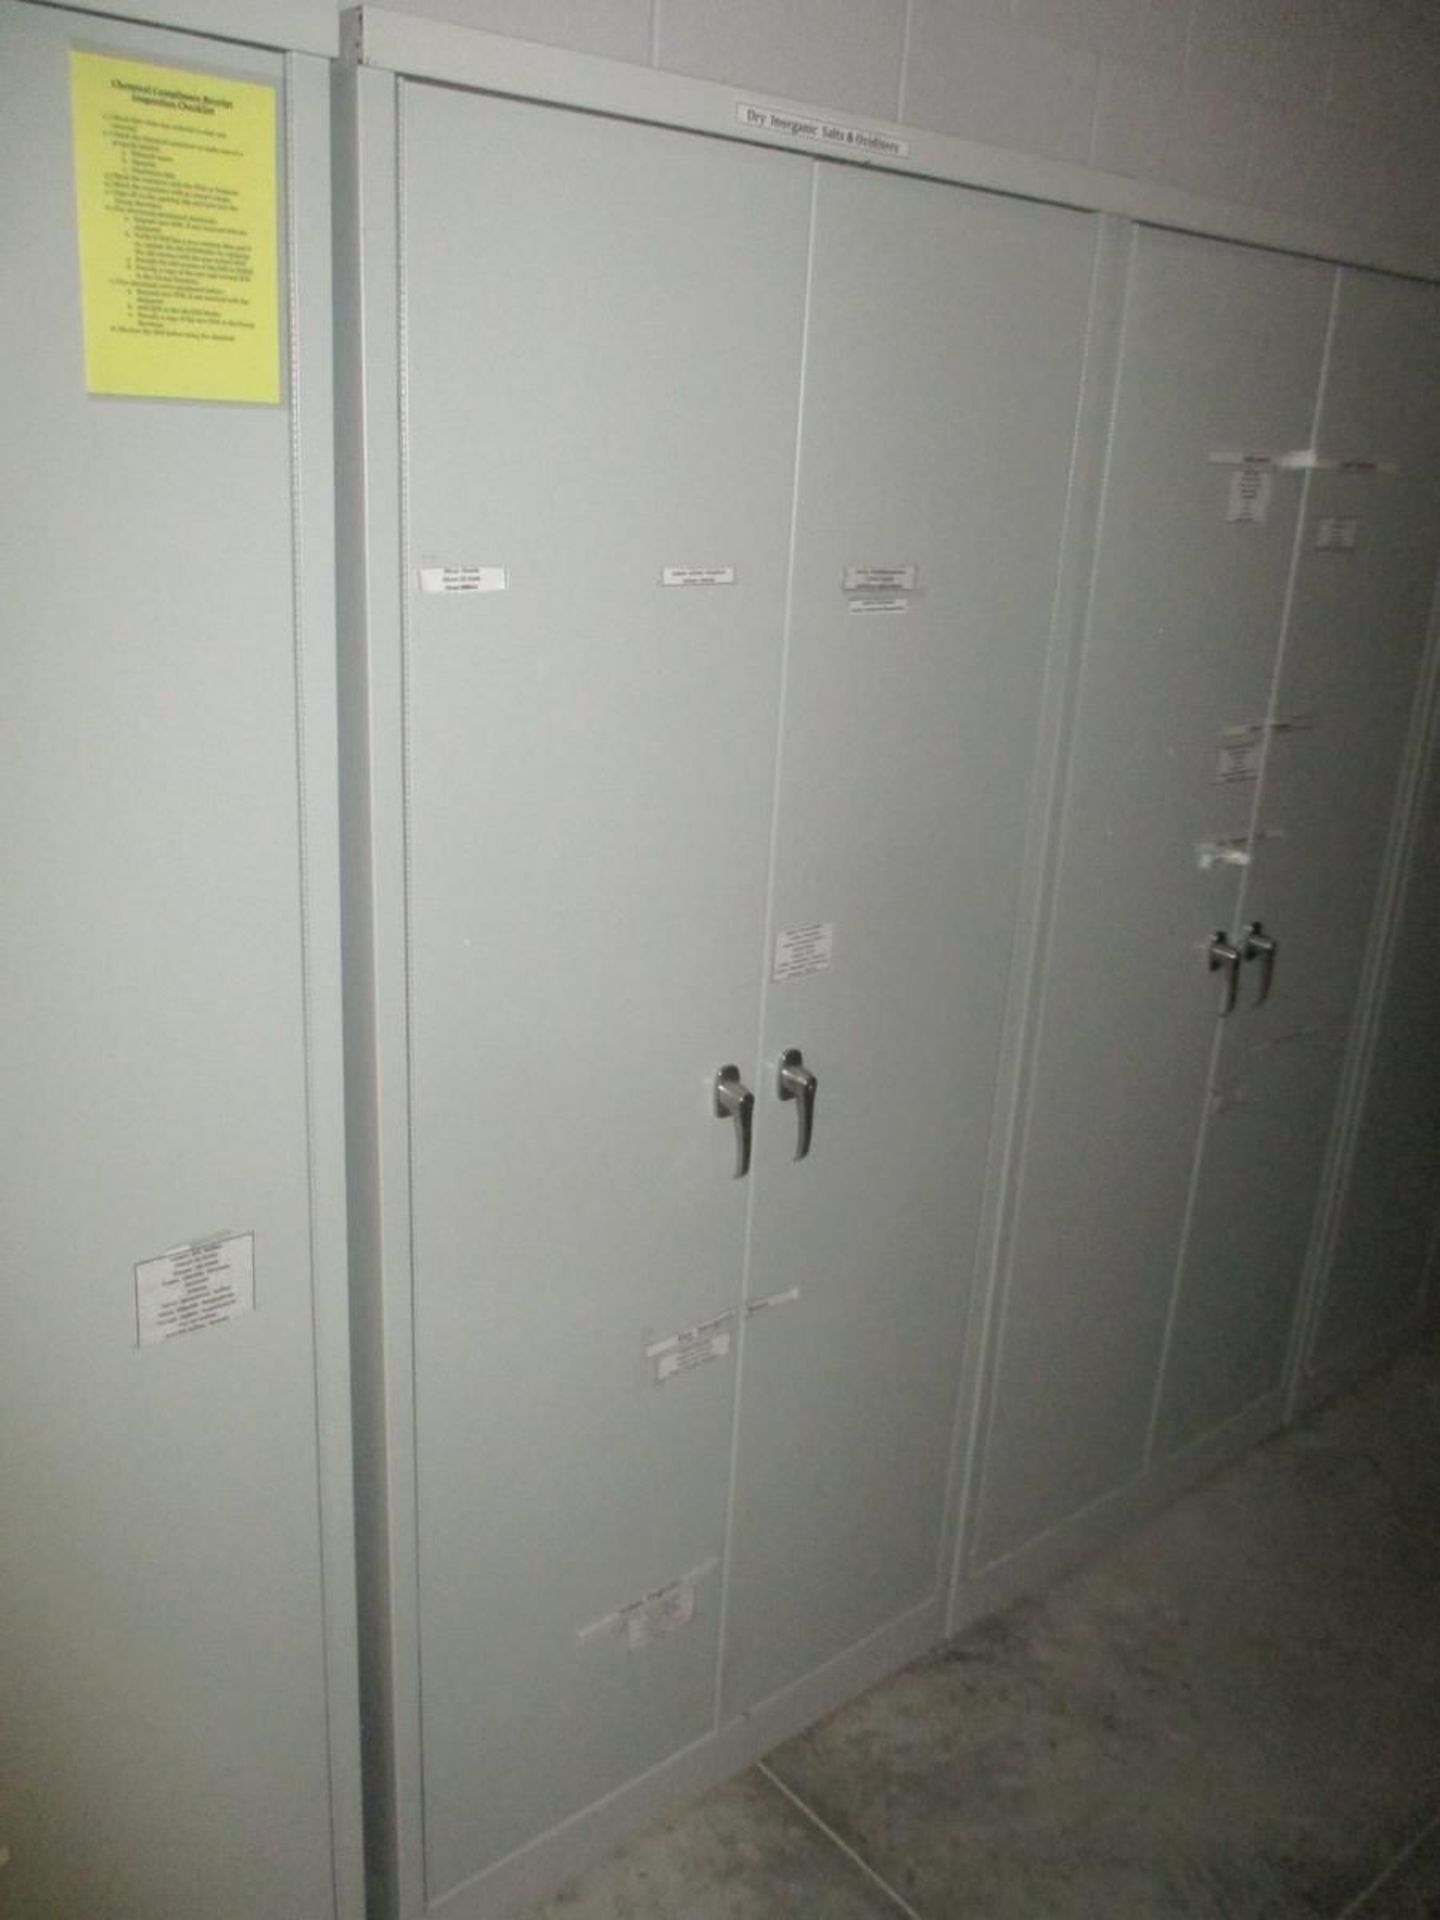 36"" W x 18"" D x 78"" H Steel Storage Cabinets - Image 2 of 8